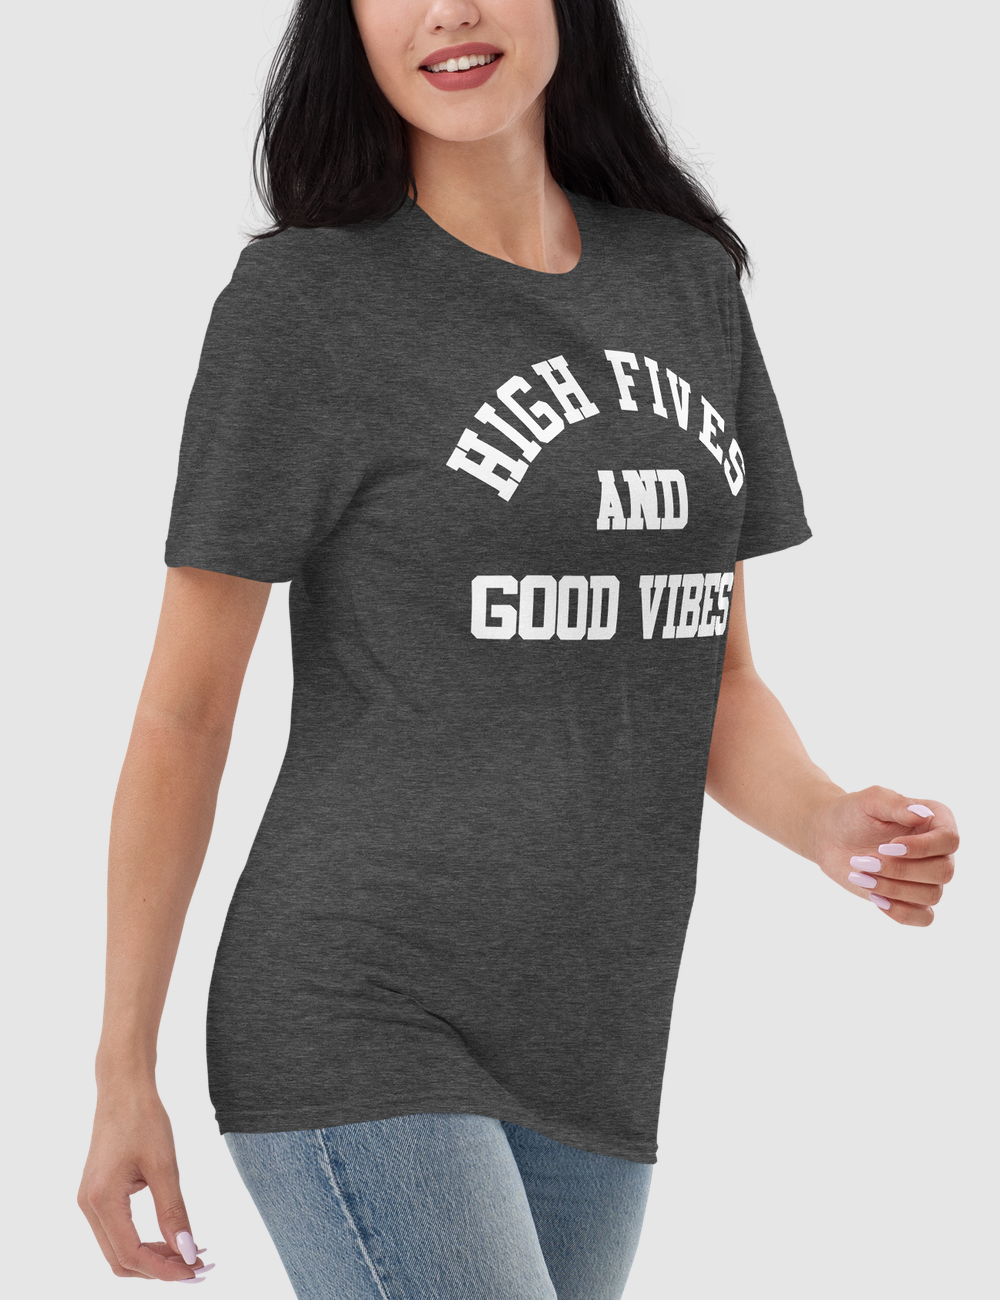 High Fives And Good Vibes Women's Relaxed T-Shirt OniTakai